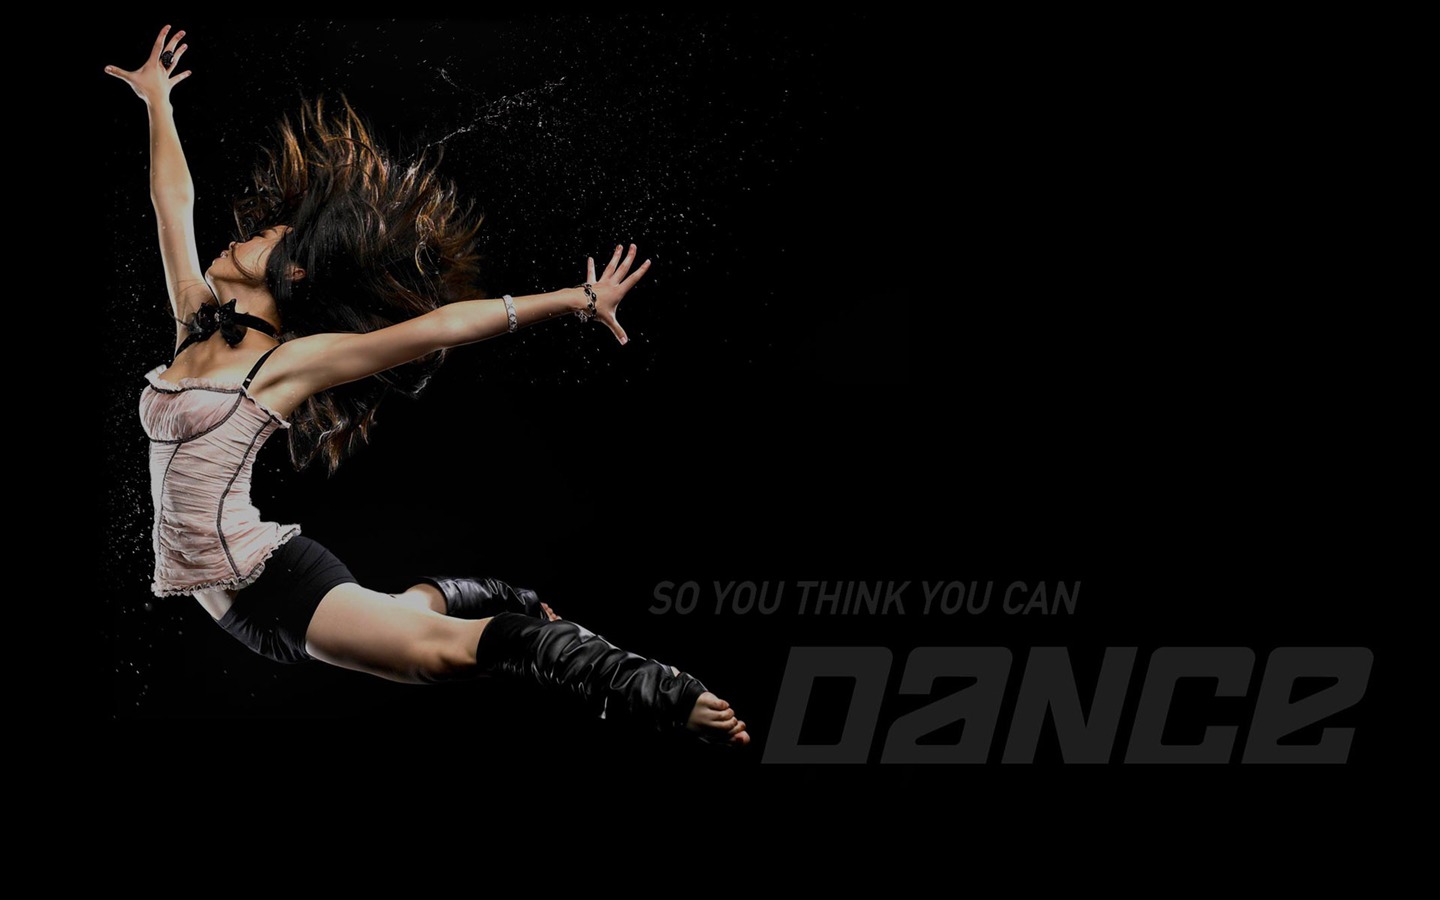 So You Think You Can Dance wallpaper (1) #1 - 1440x900